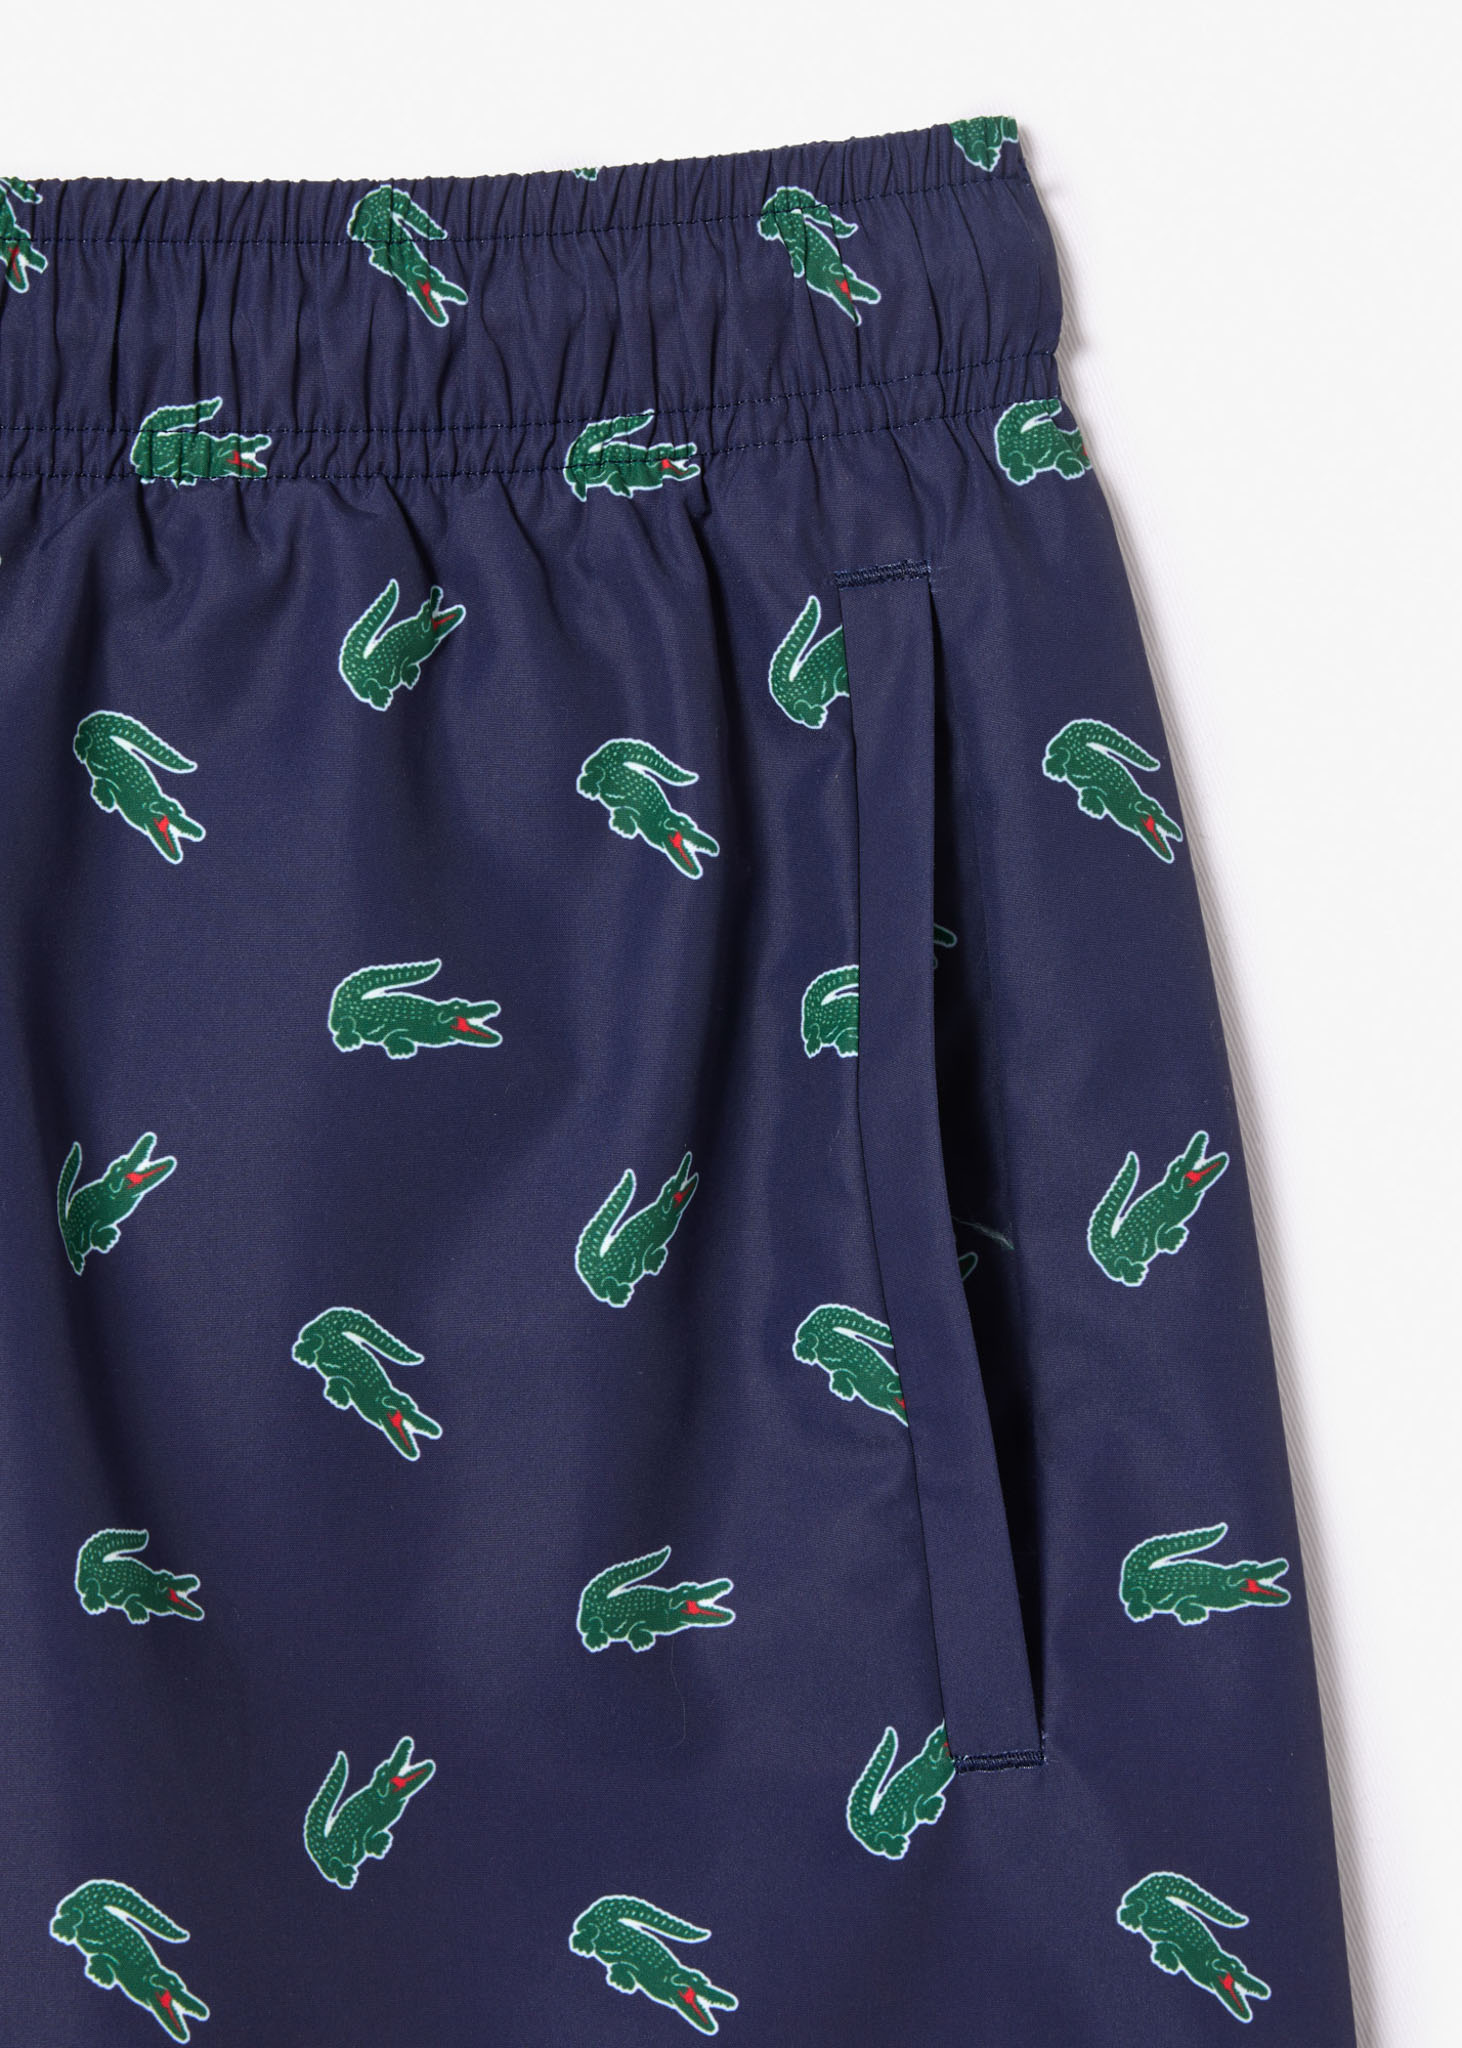 Lacoste Zwembroeken  Swimming trunks all over print - navy blue multico 